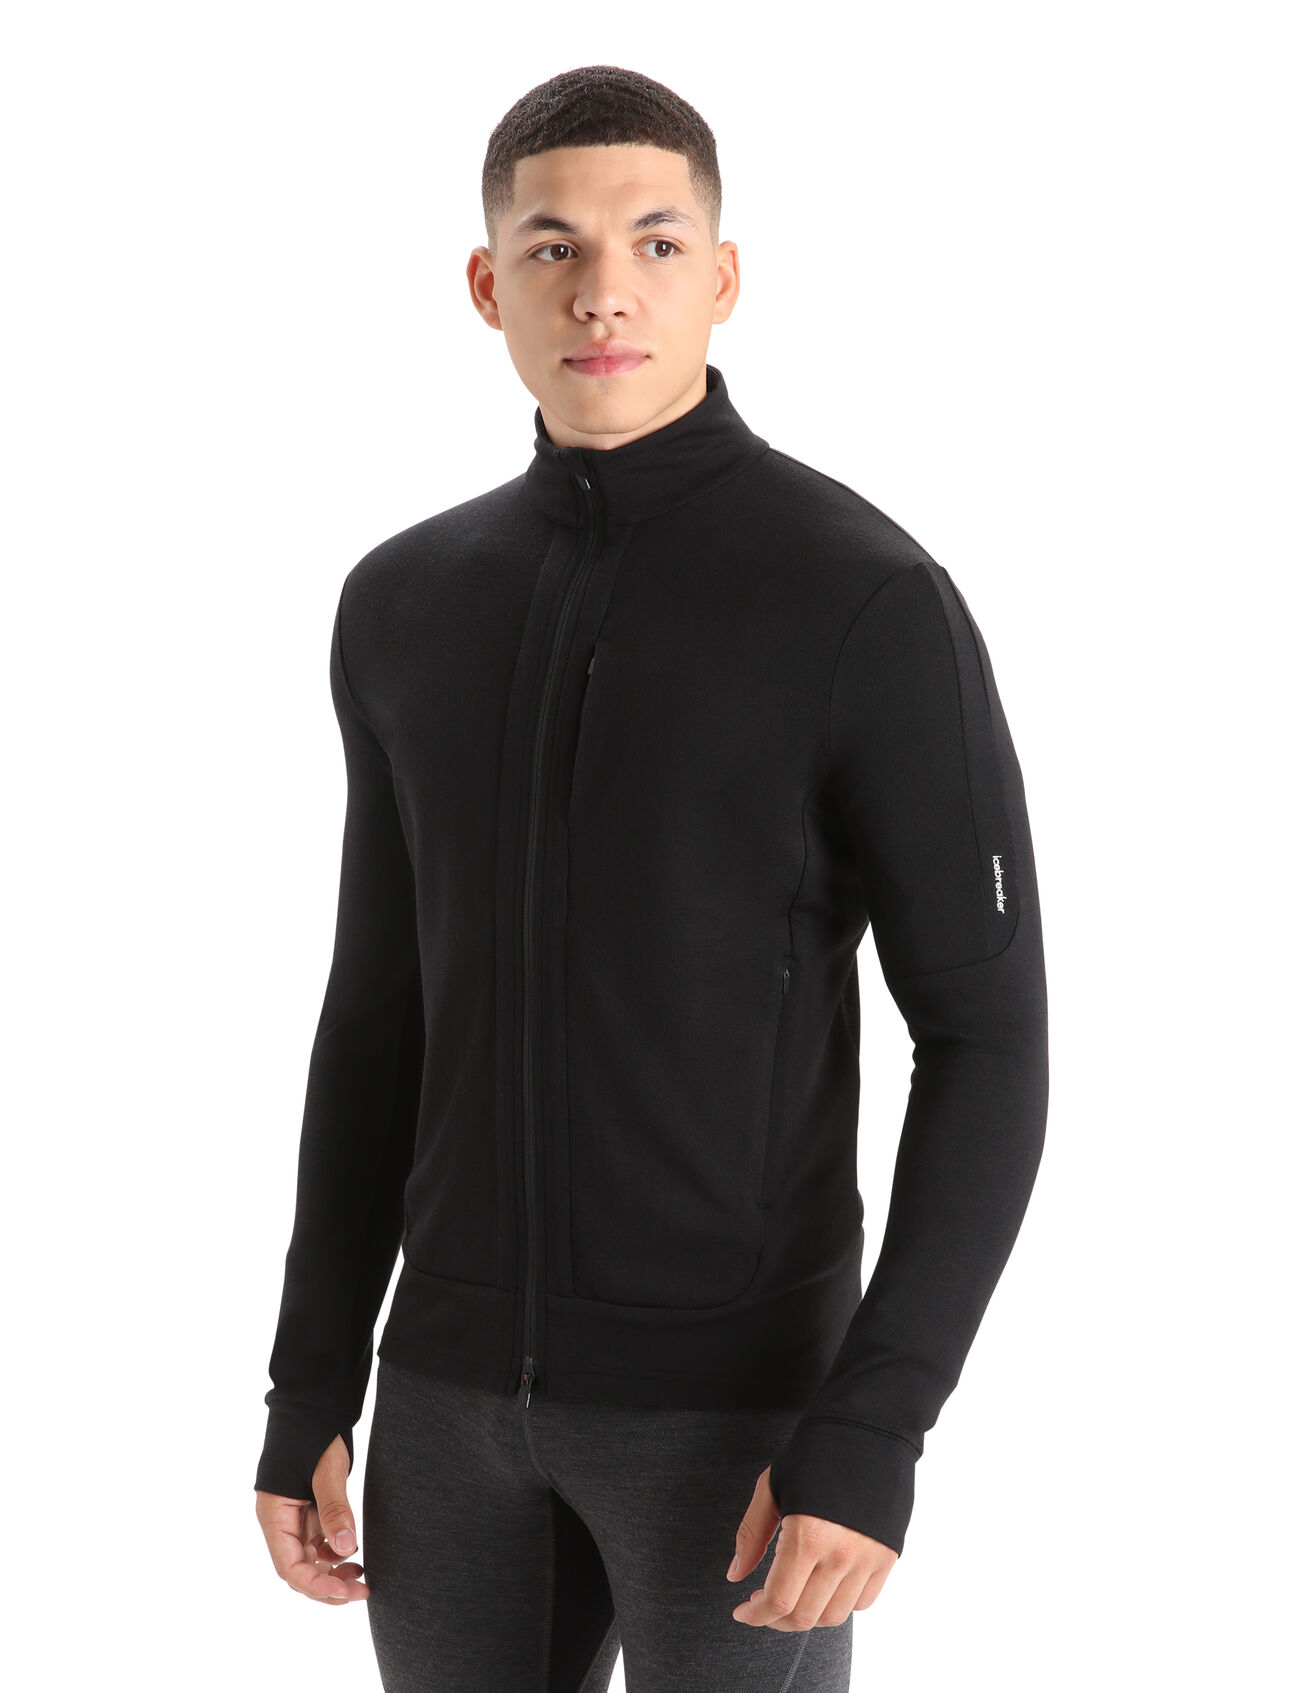 Mens Merino Quantum III Long Sleeve Zip A 100% merino wool mid layer ideal for technical mountain adventures, the Quantum III Long Sleeve Zip helps regulate your body temperature when you're on the move.